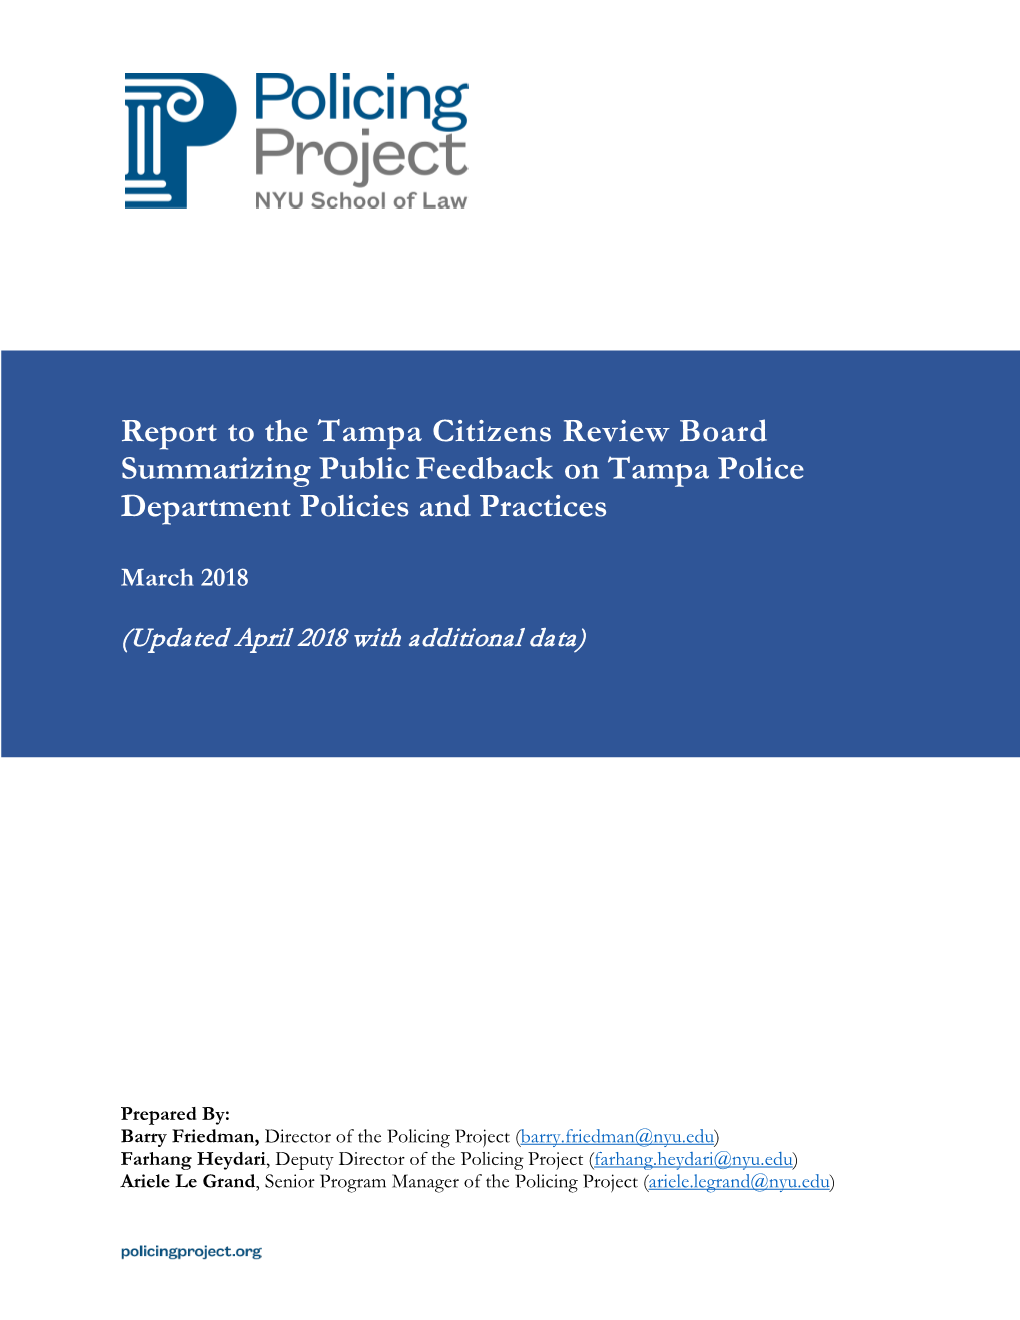 Report to the Tampa Citizens Review Board Summarizing Public Feedback on Tampa Police Department Policies and Practices